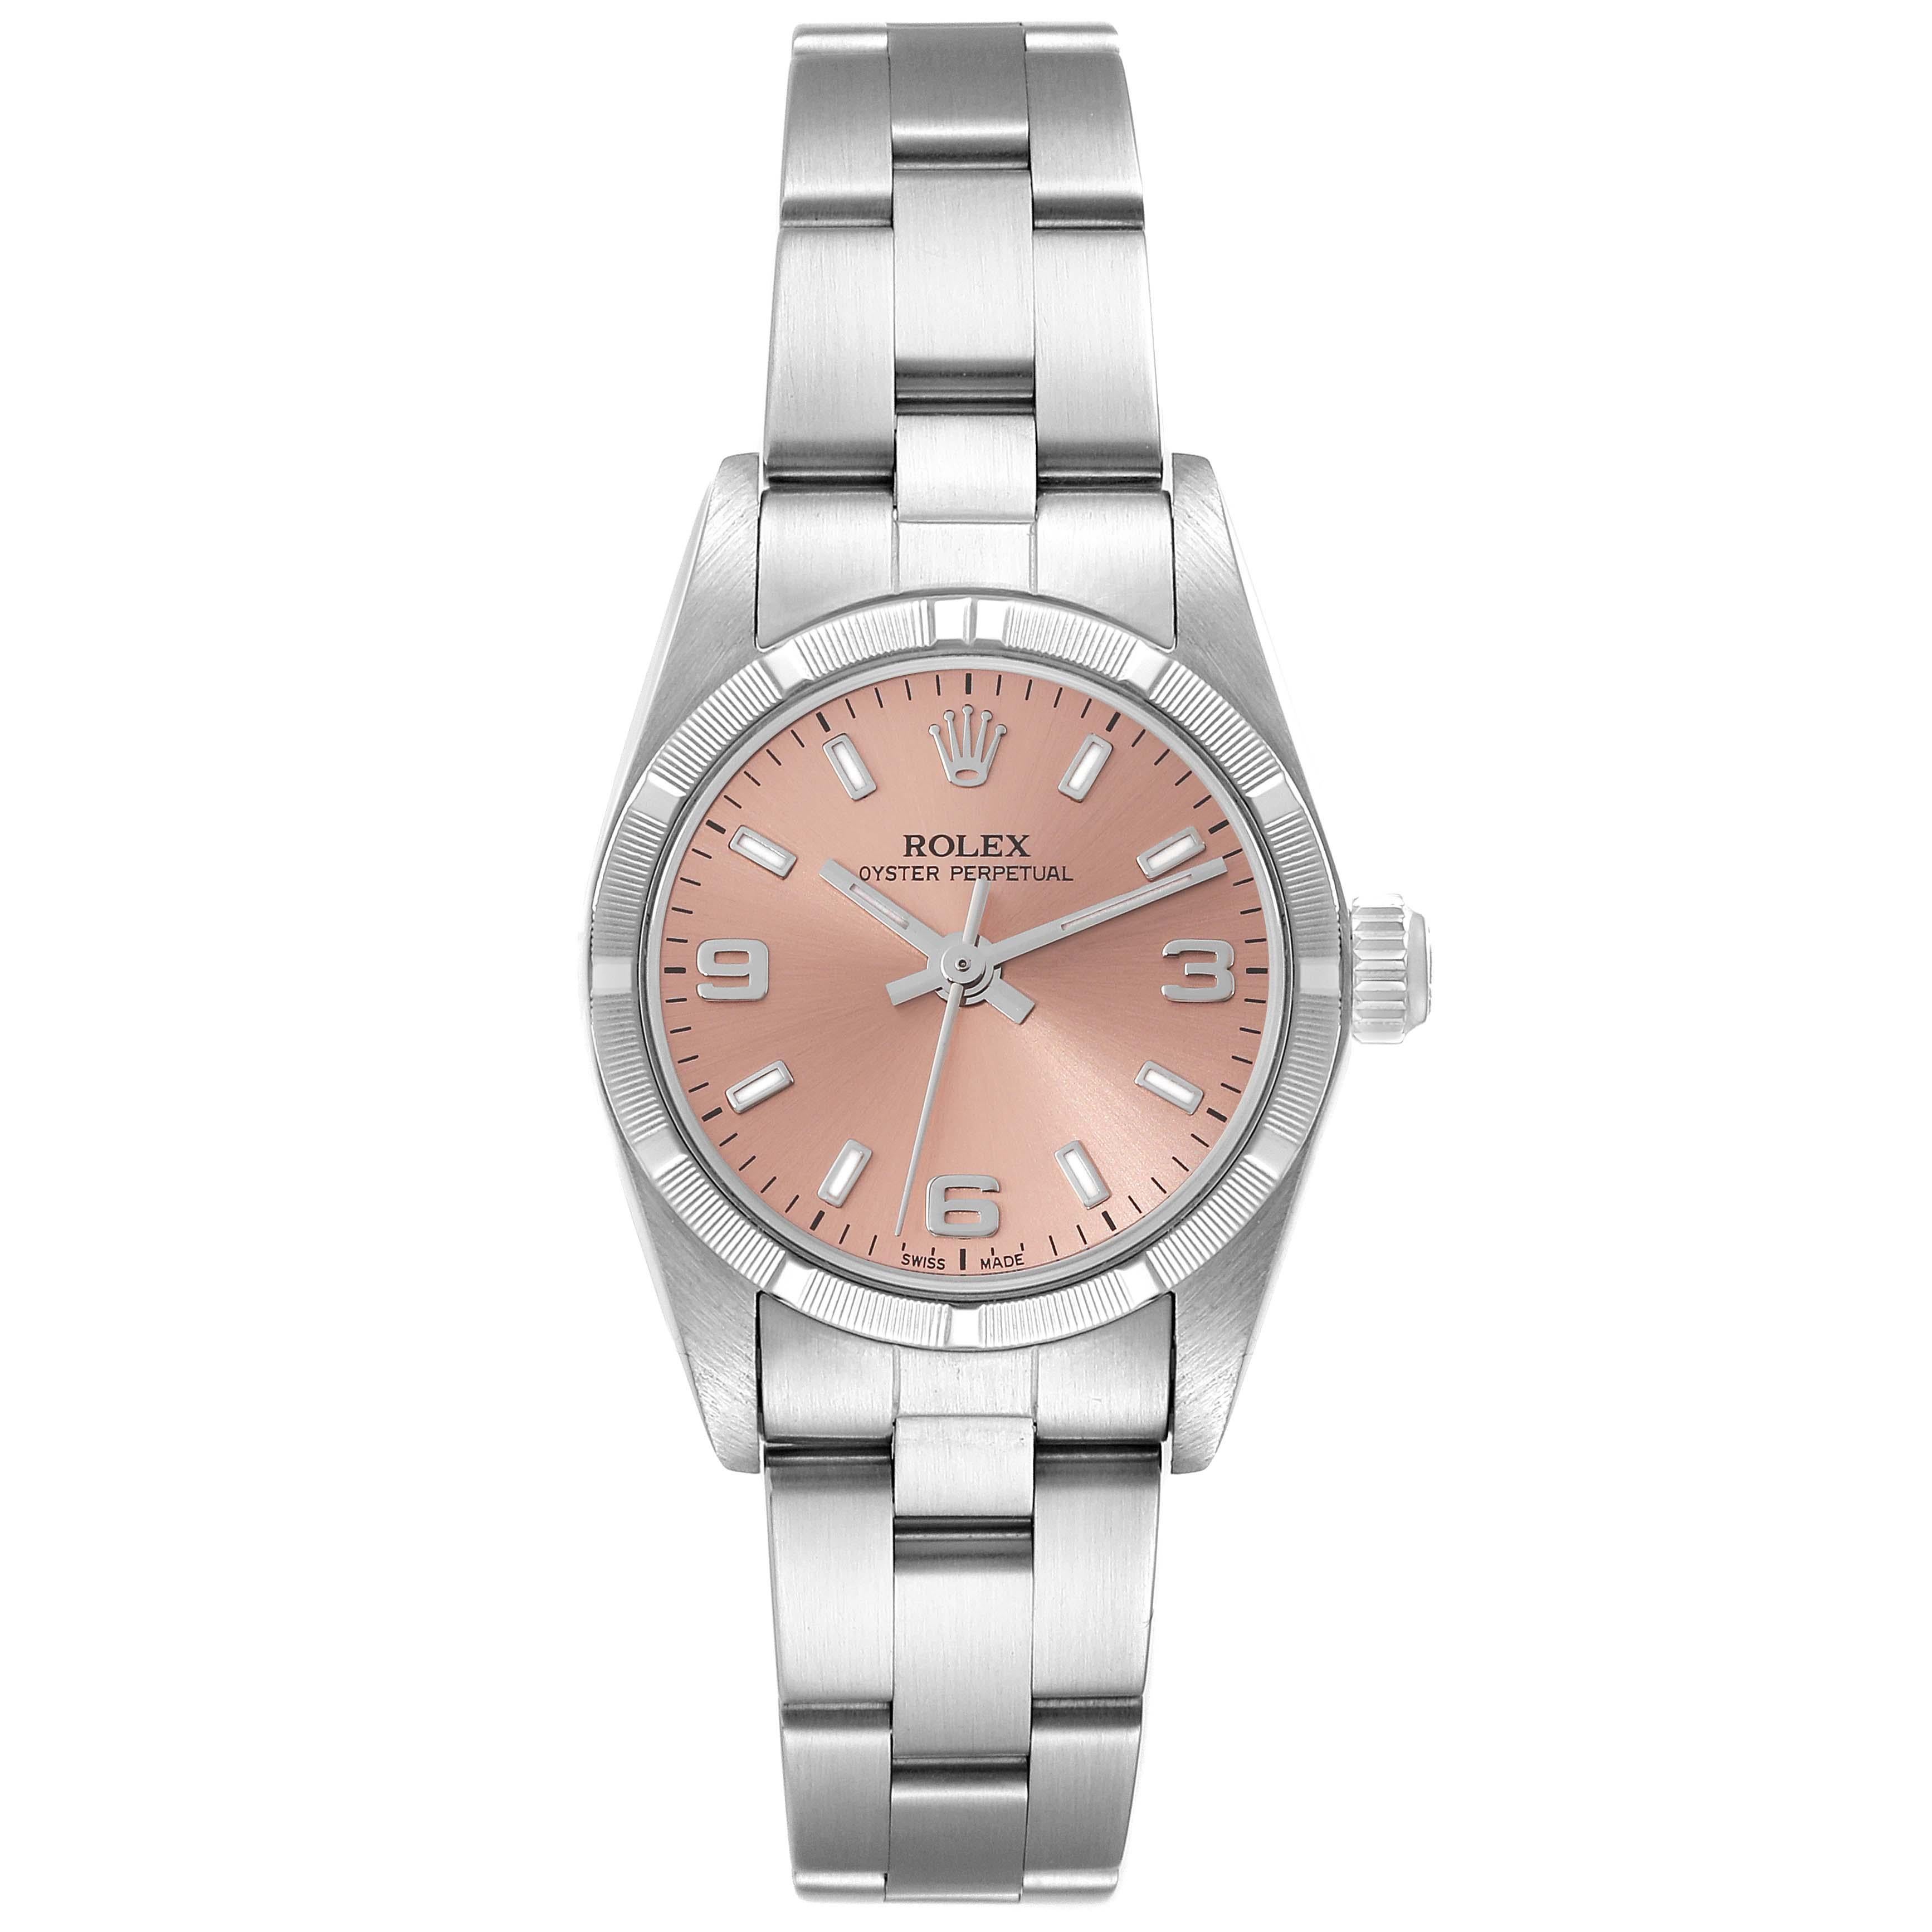 Rolex Oyster Perpetual Salmon Dial Steel Ladies Watch 76030. Officially certified chronometer automatic self-winding movement. Stainless steel oyster case 24.0 mm in diameter. Rolex logo on the crown. Stainless steel engine turned bezel. Scratch